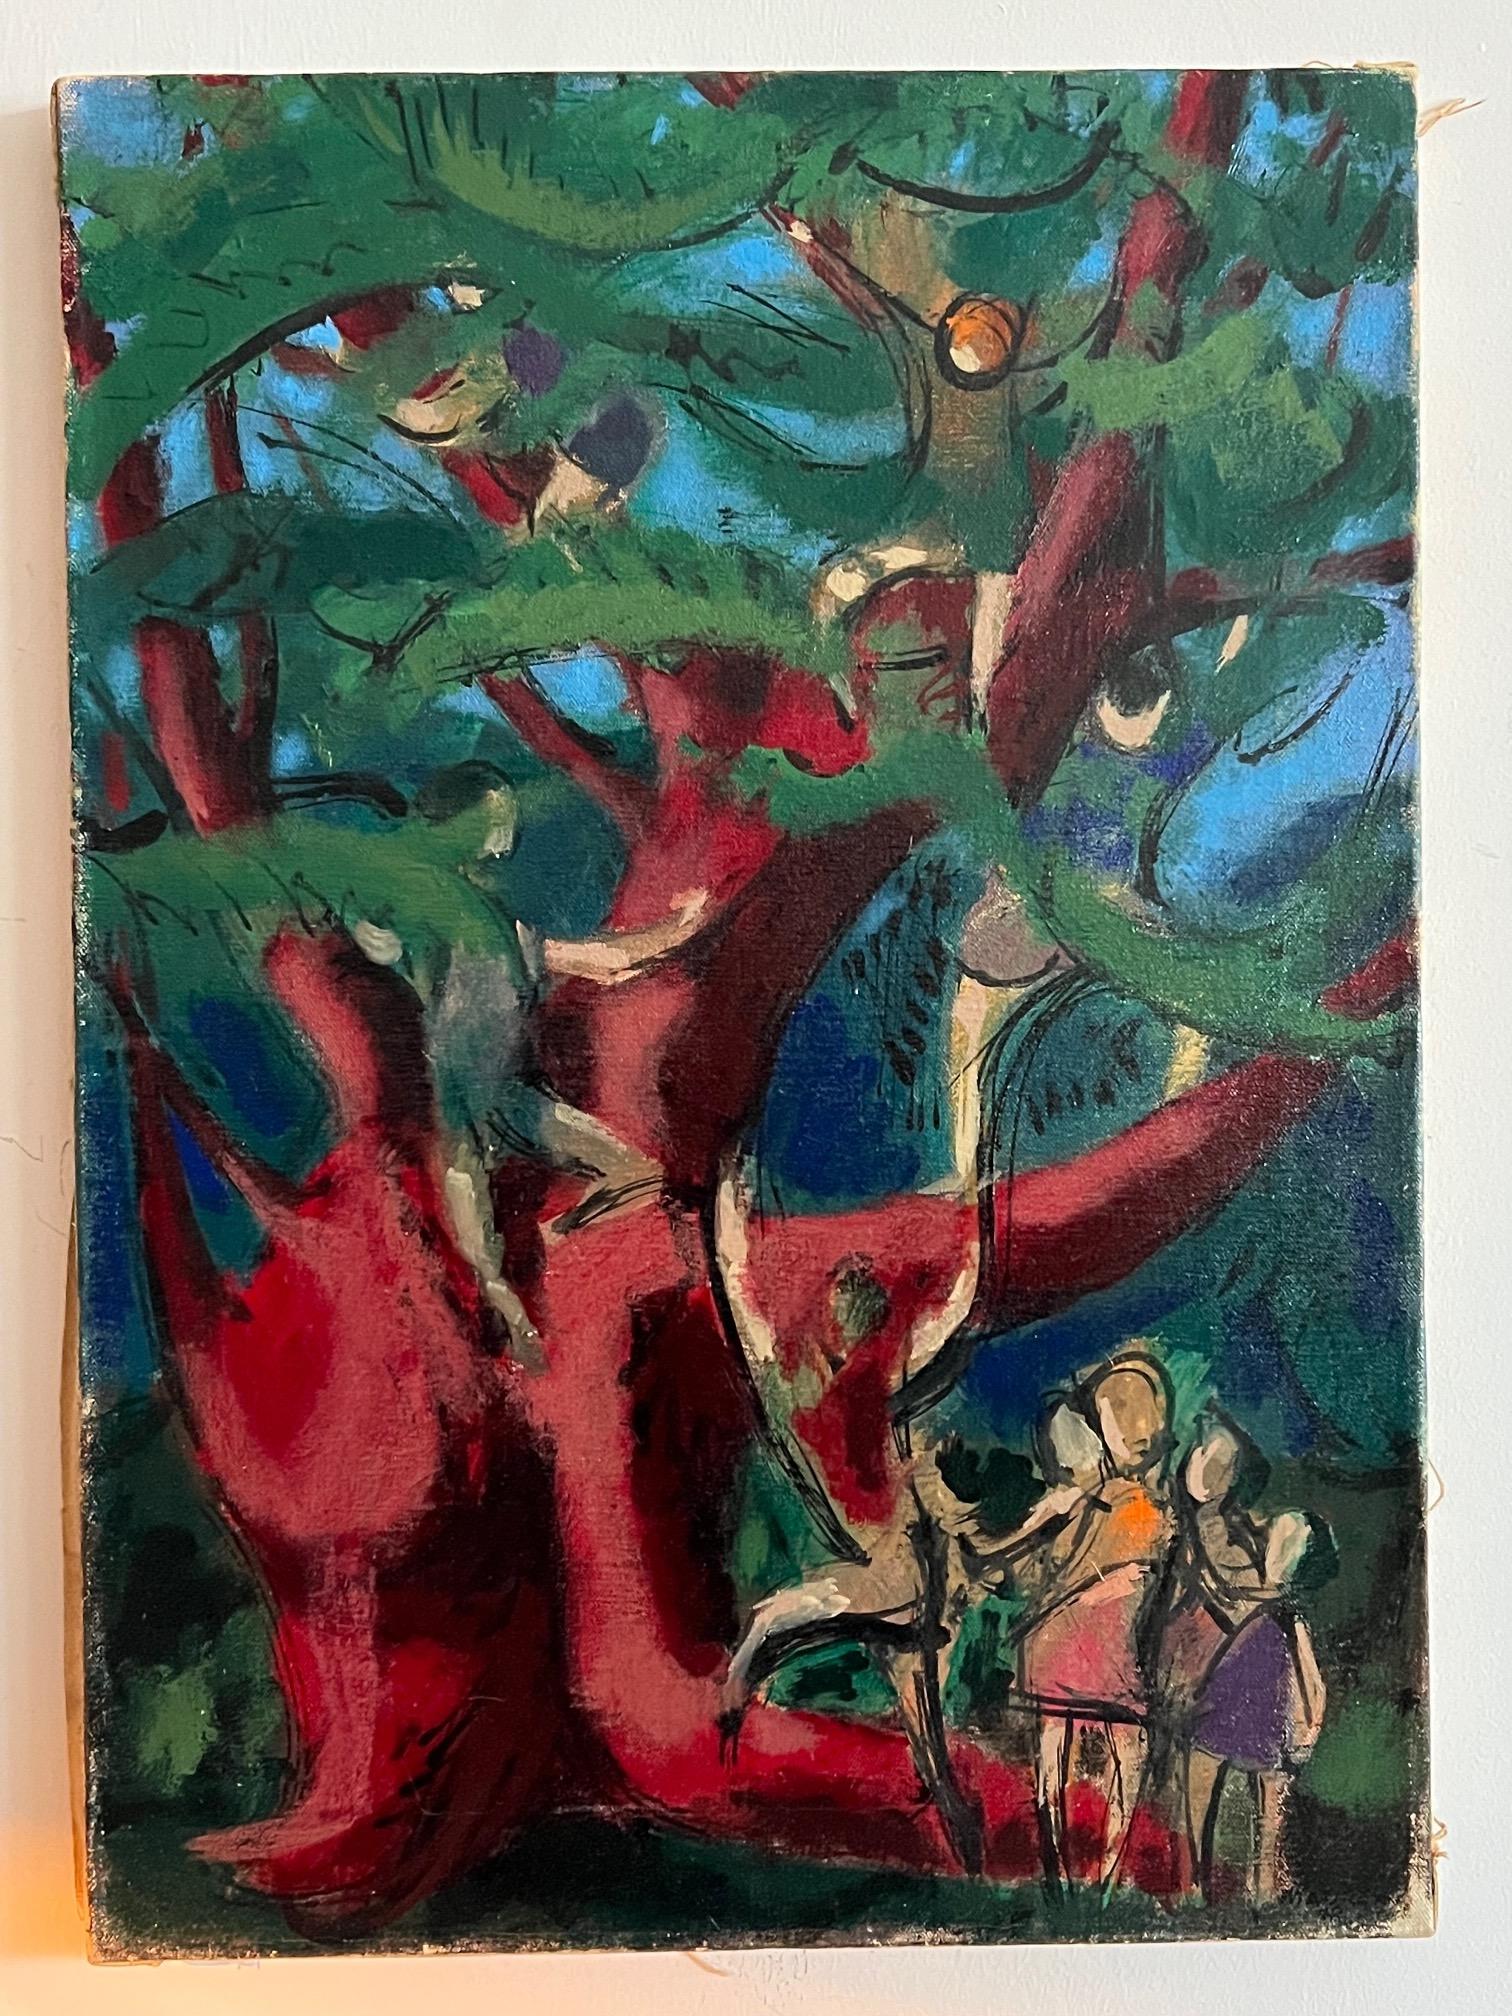 A charming oil painting by noted Washington DC artist Leonard Maurer, ca' 1948. Depicting children climbing trees. Wonderful sense of color and a real mid century feeling in L.Maurer work from this period.